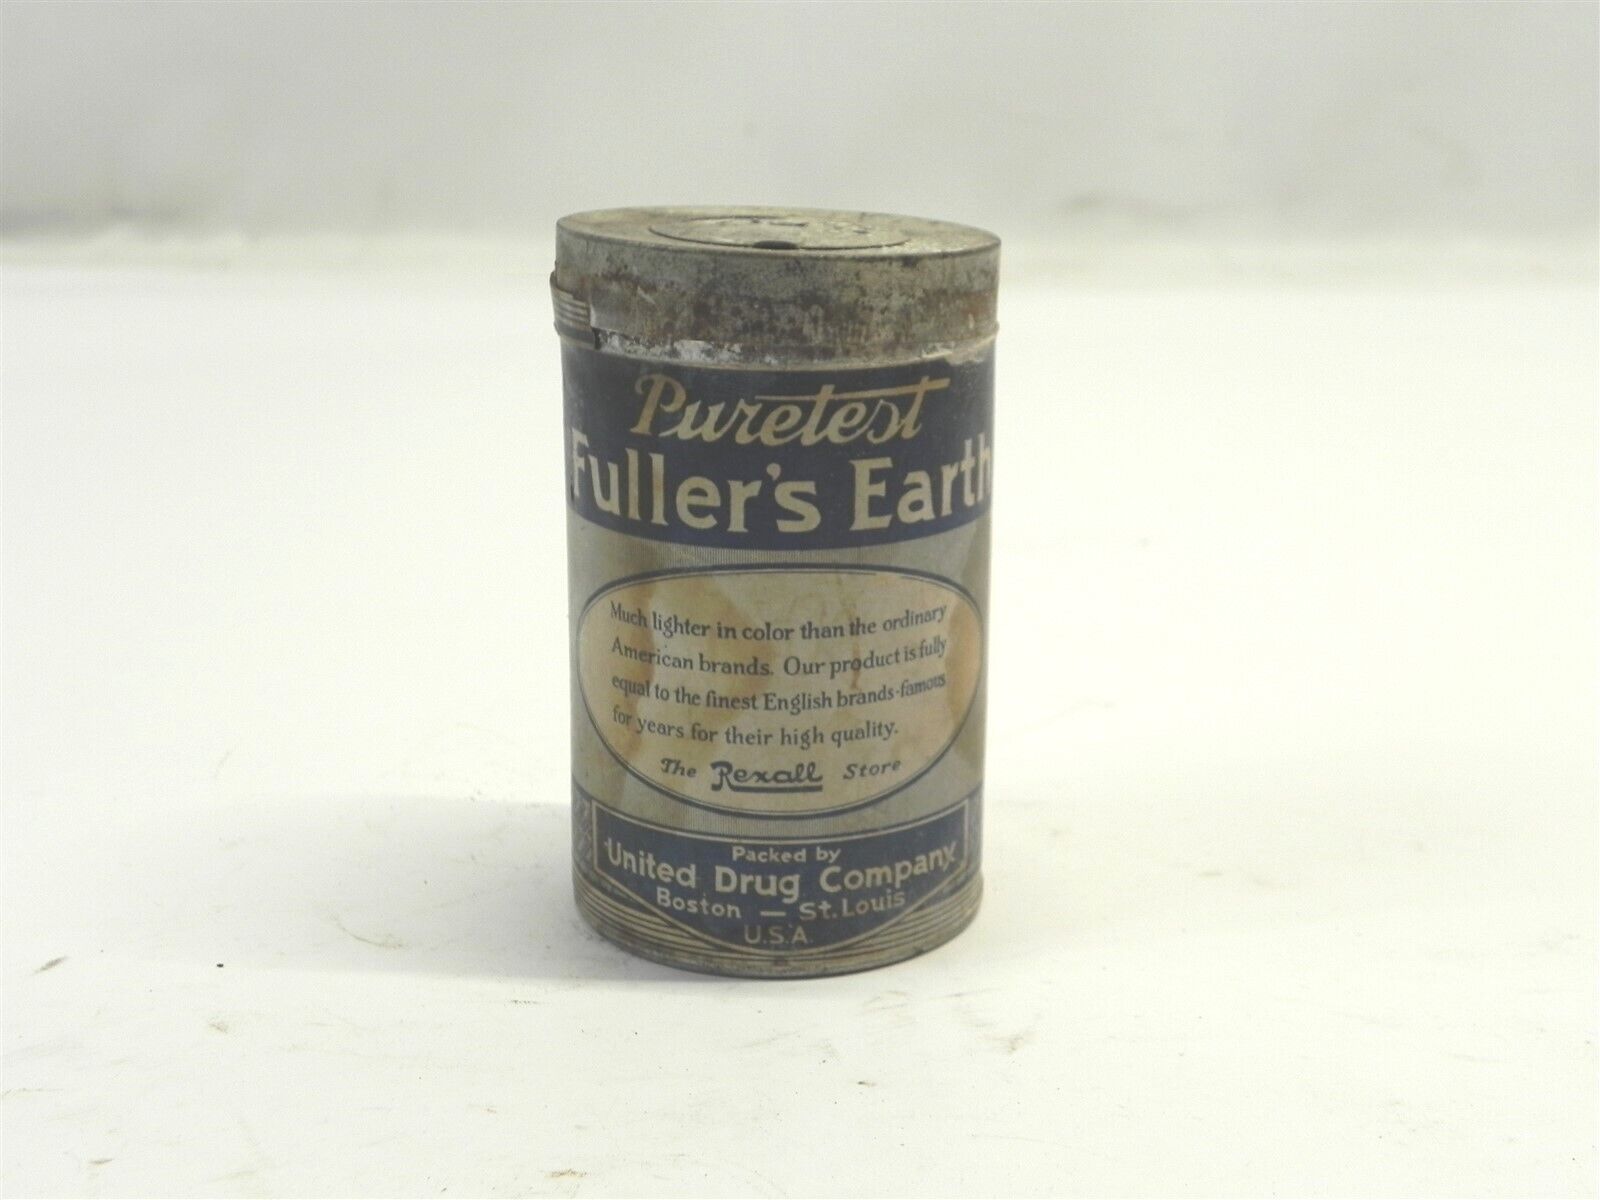 VINTAGE PURETEST FULLER'S EARTH POWDER 4 OUNCE CAN 1/4 FULL PRE-OWNED USED 